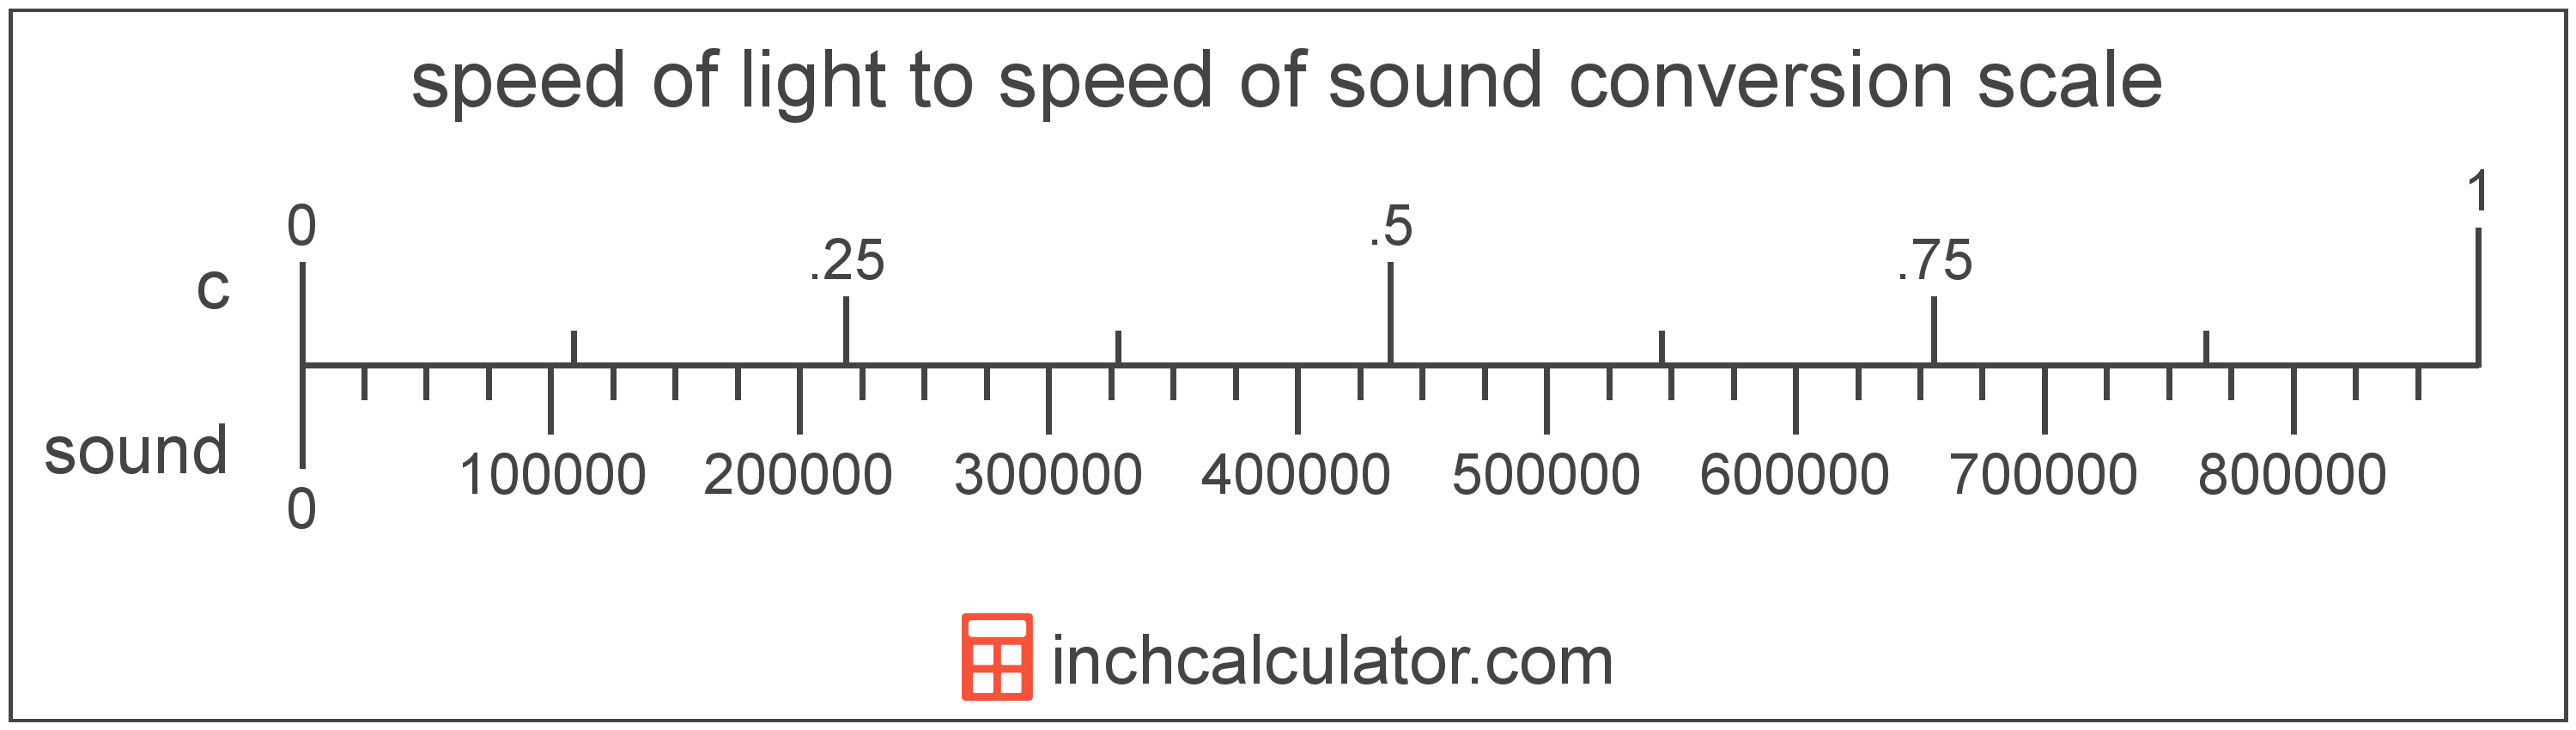 conversion scale showing speed of light and equivalent speed of sound speed values